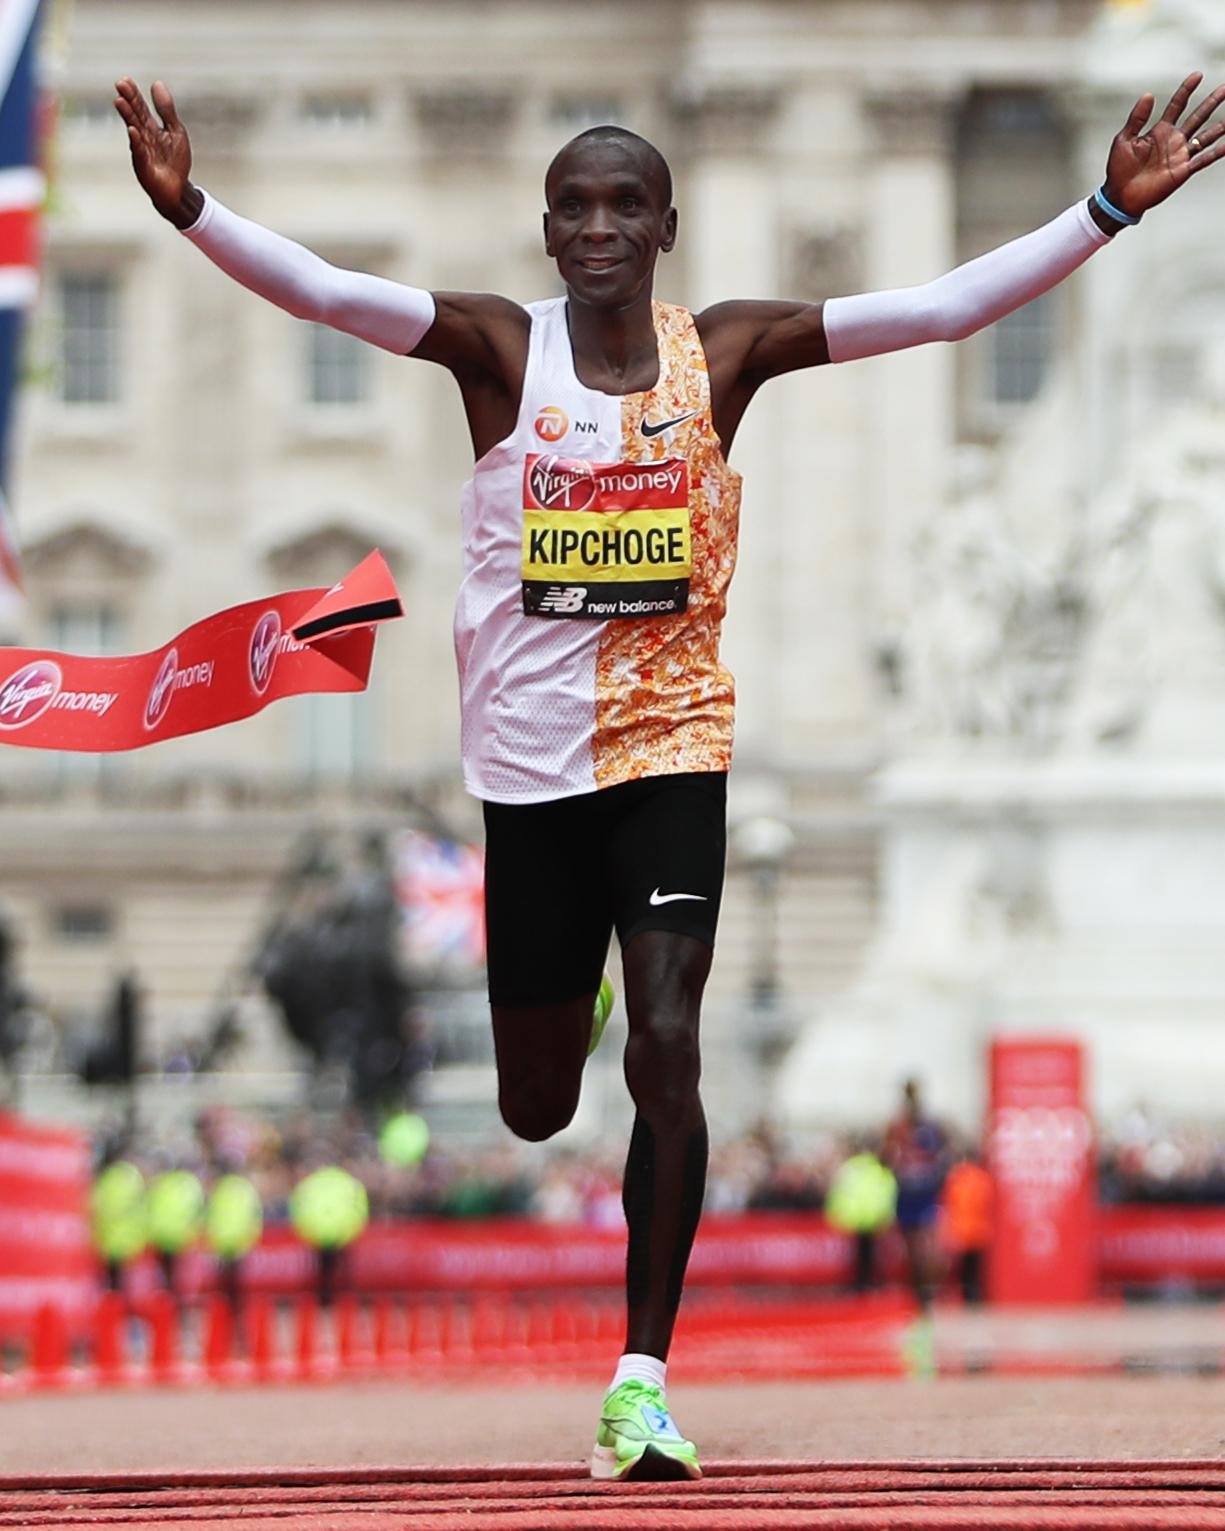 Eliud Kipchoge to the rescue in food relief project in Kenya - Sports Leo